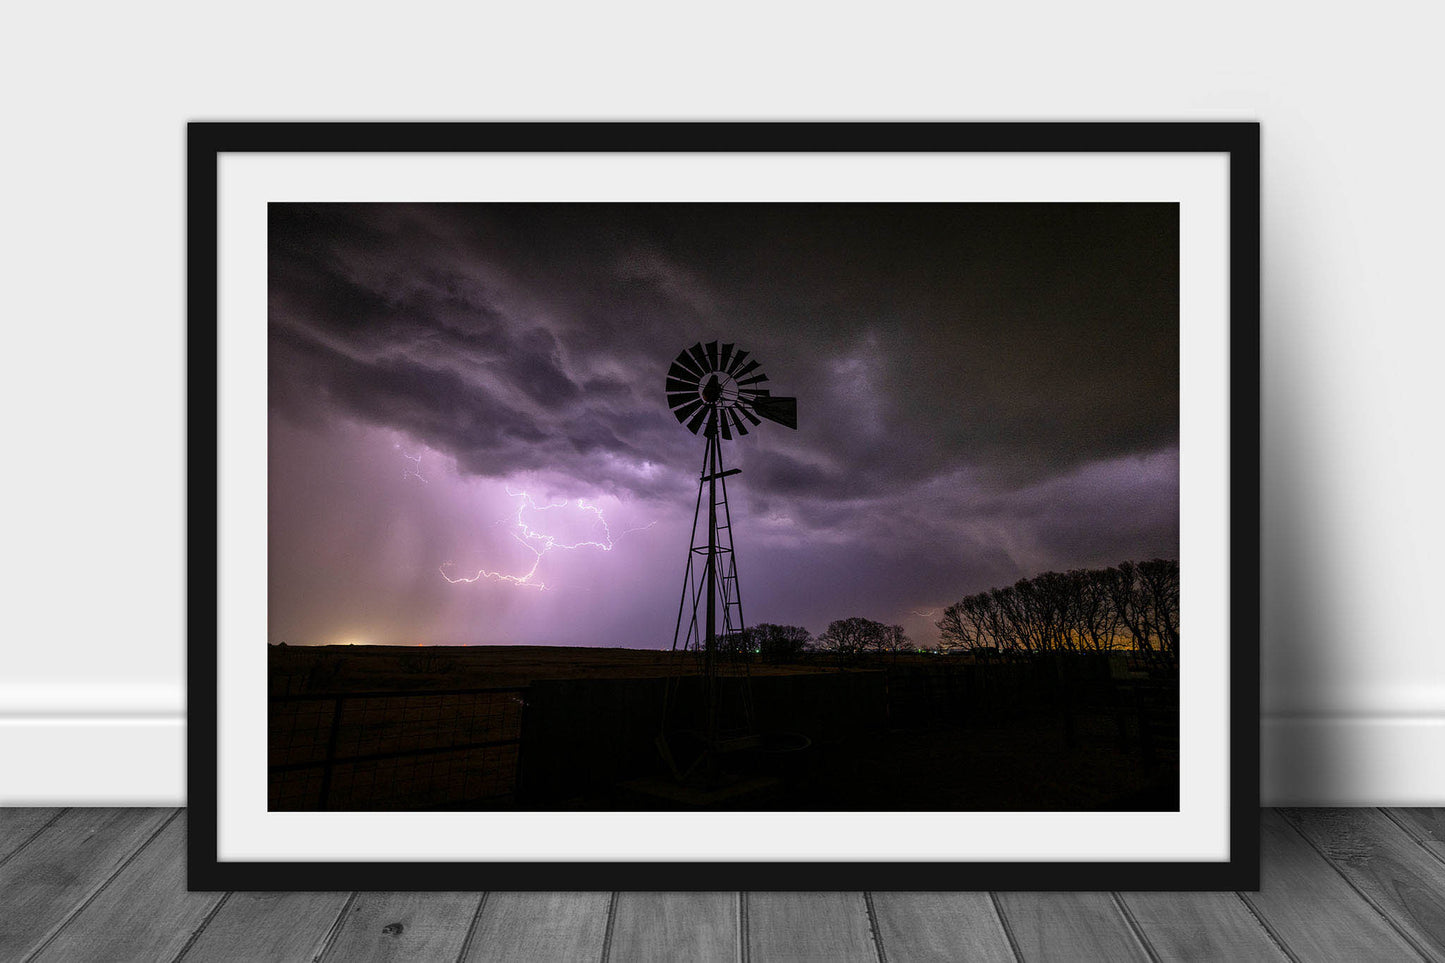 Framed and matted country print of an old windmill and lightning on a stormy night in Oklahoma by Sean Ramsey of Southern Plains Photography.